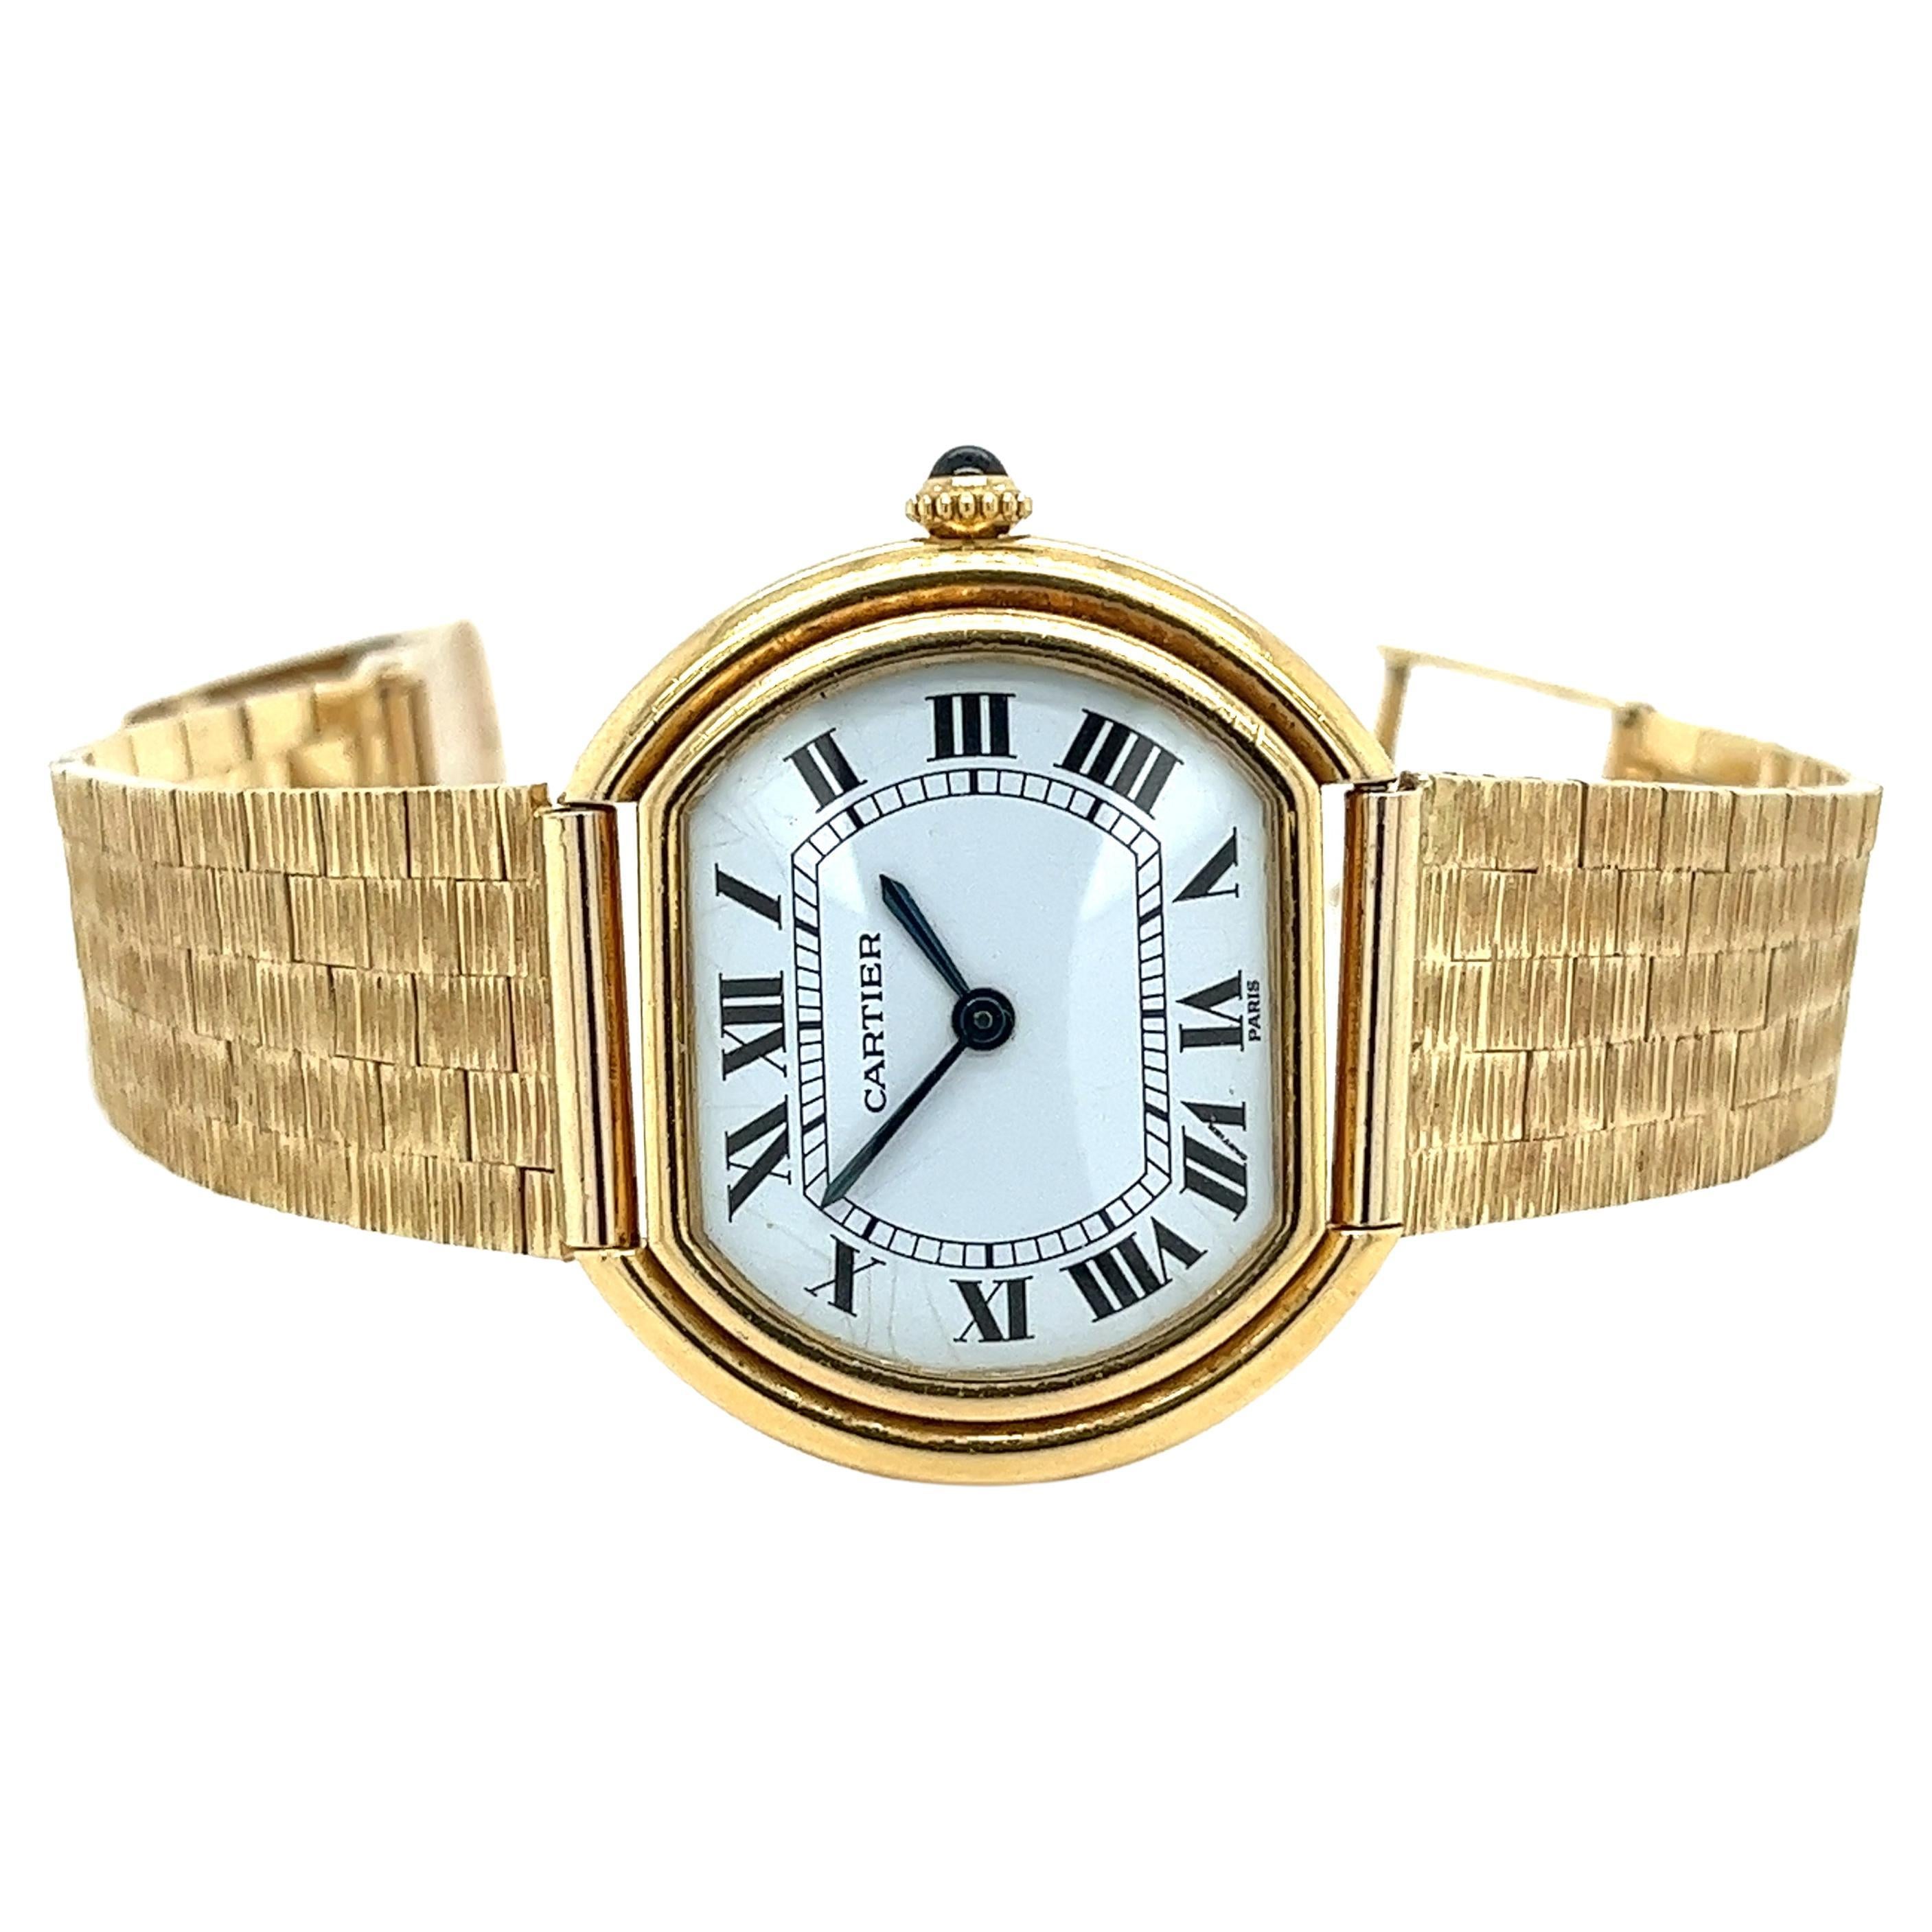 Vintage Cartier Paris 18k gold ladies watch with a Roman numeral dial and the classic Cartier style blue sword-shaped hour markers. Manual wind movement with a screw-down crown and sapphire crystal. 

The bracelet is made by Lucien Piccard, part of